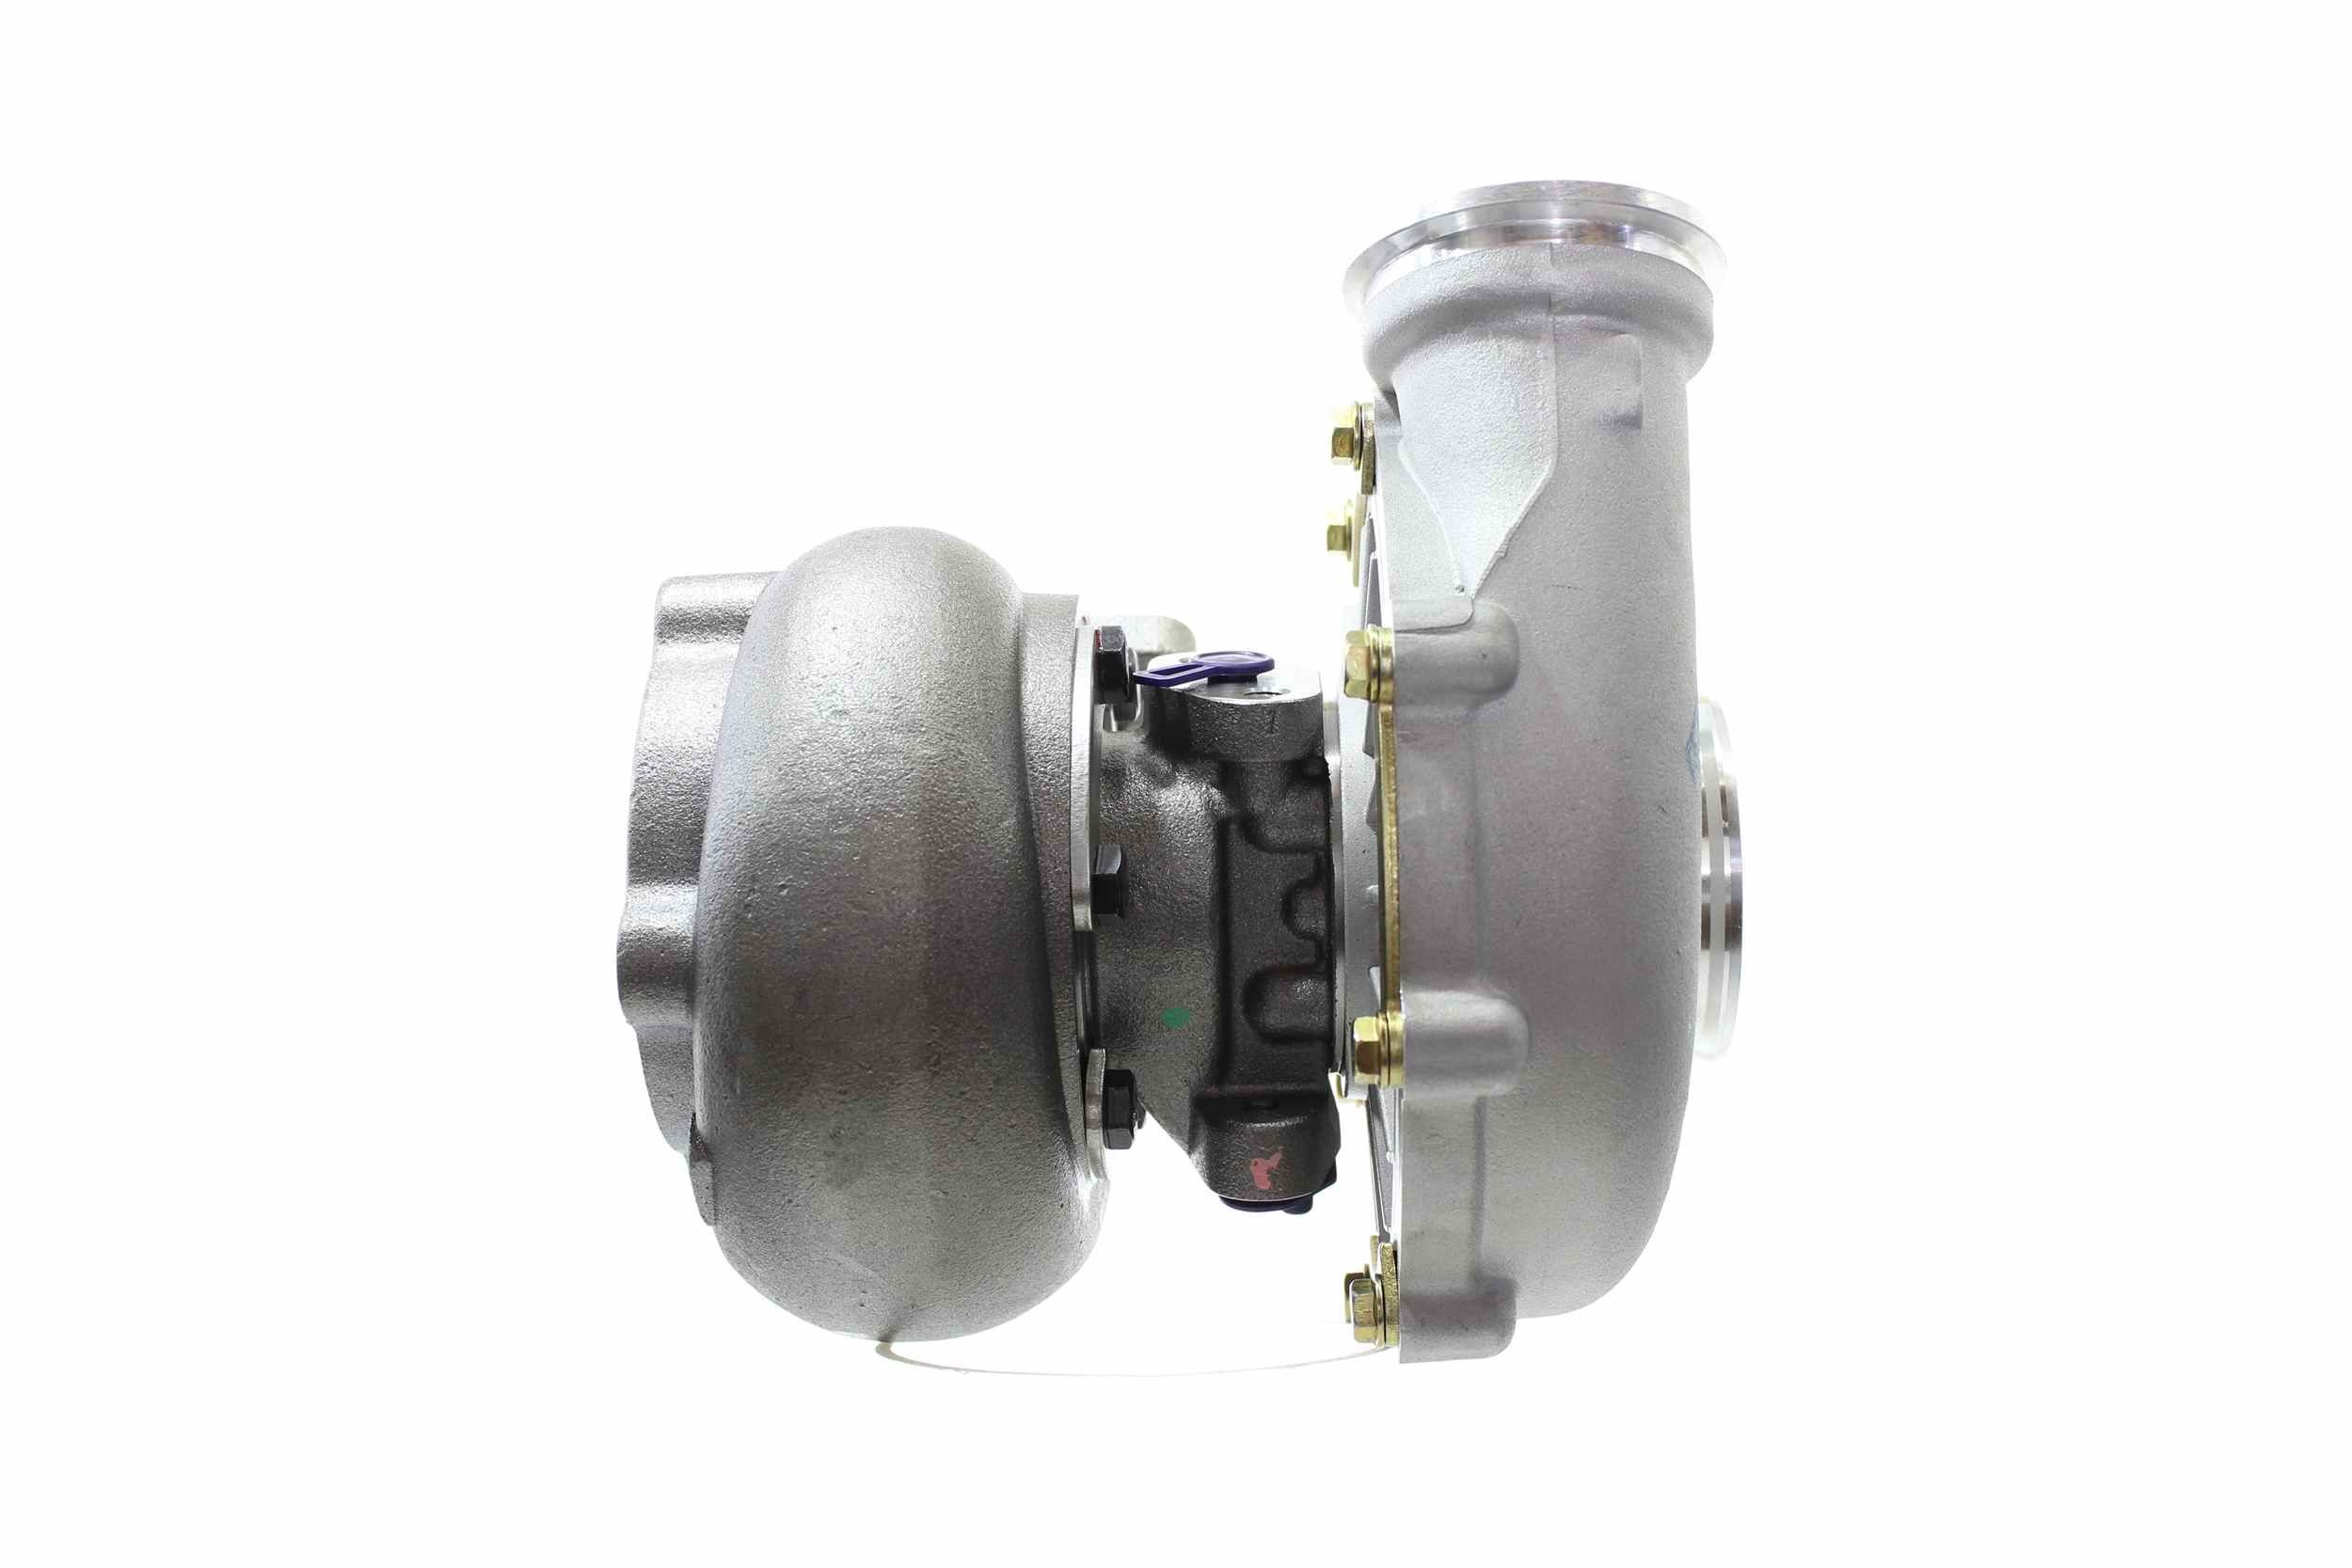 10900030 Turbocharger 11900553 ALANKO Exhaust Turbocharger, Incl. Gasket Set, with attachment material